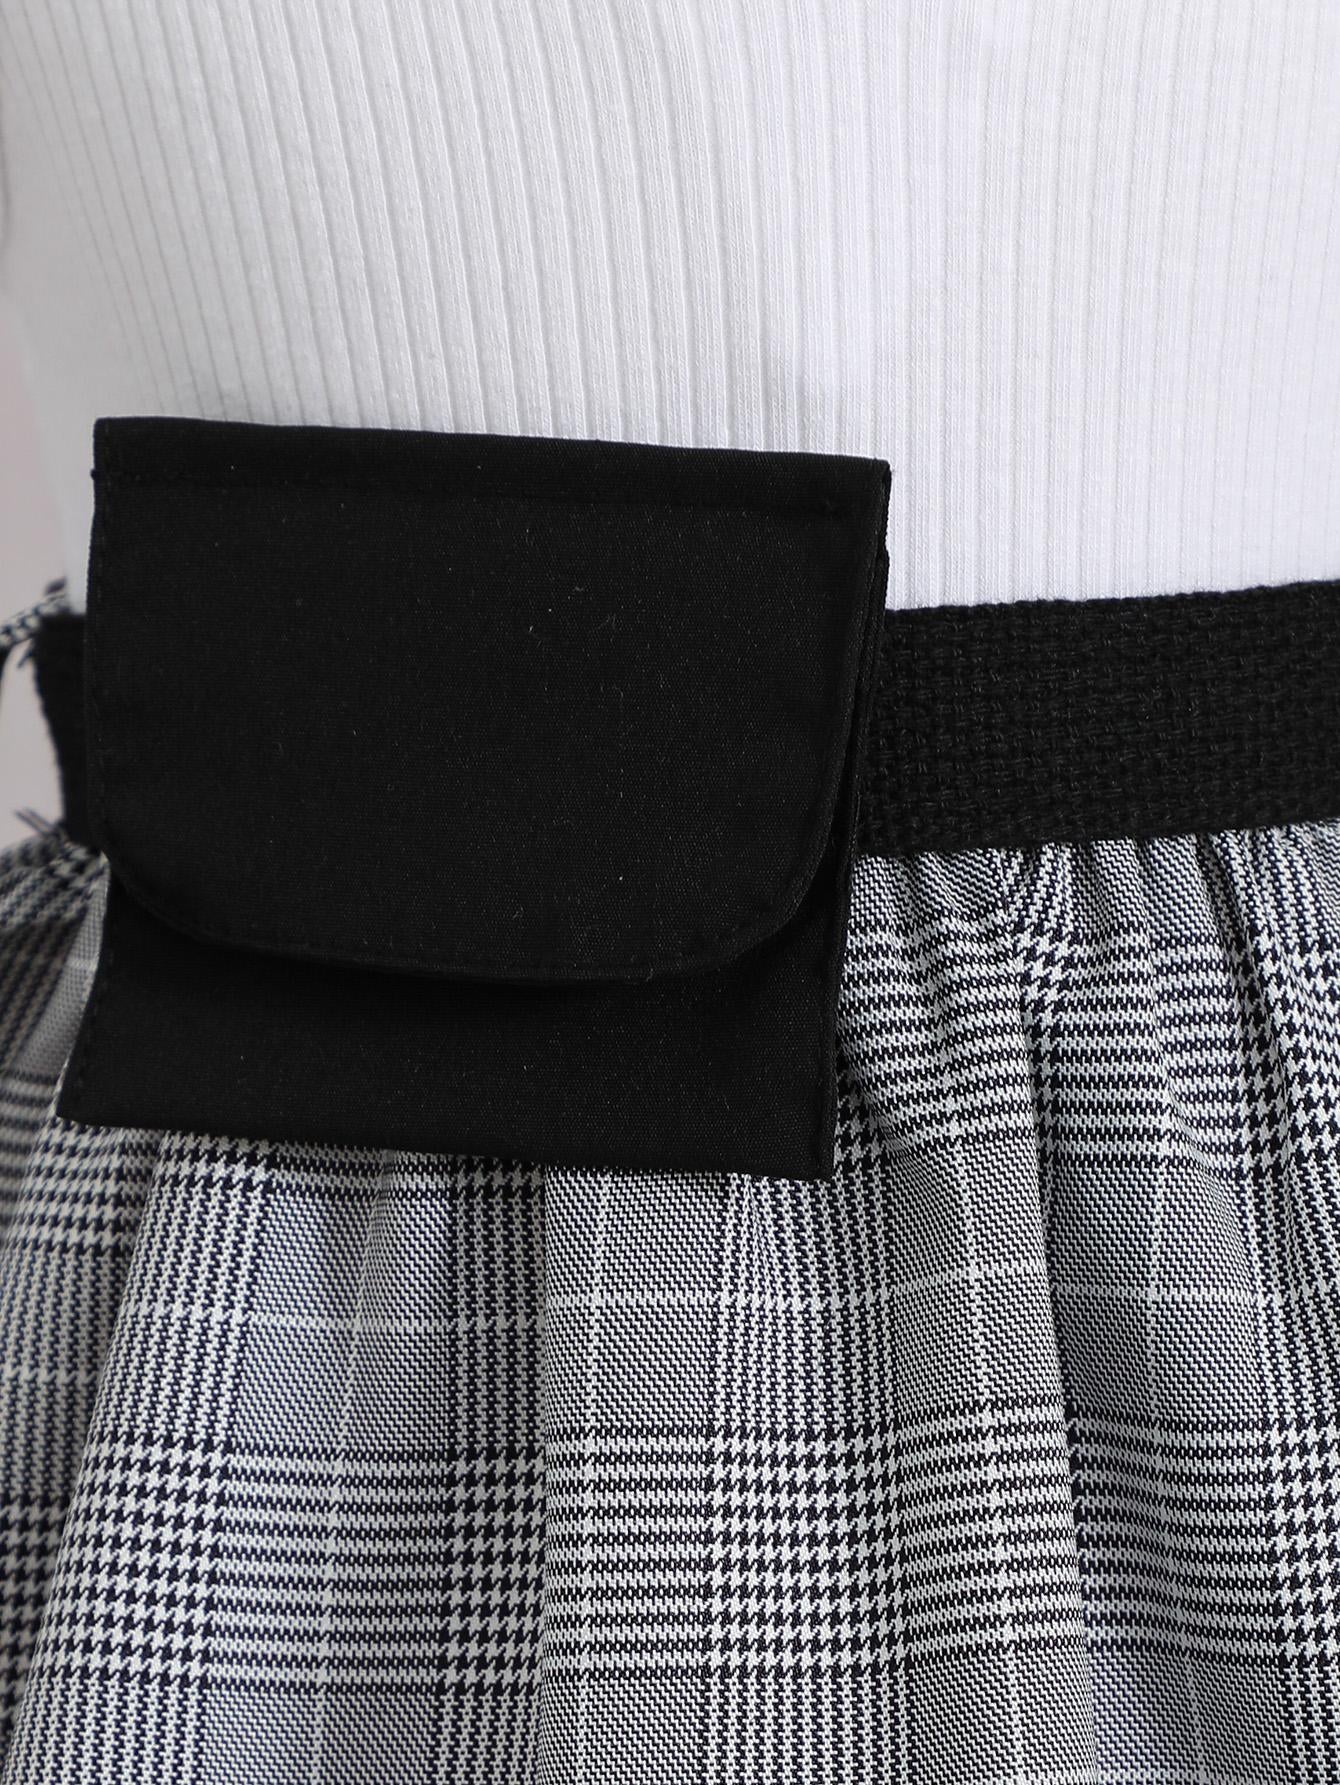 6M-3Y Baby girl lapel black and white checkered sleeveless dress baby girl dress baby girl clothes Catpapa 112211157